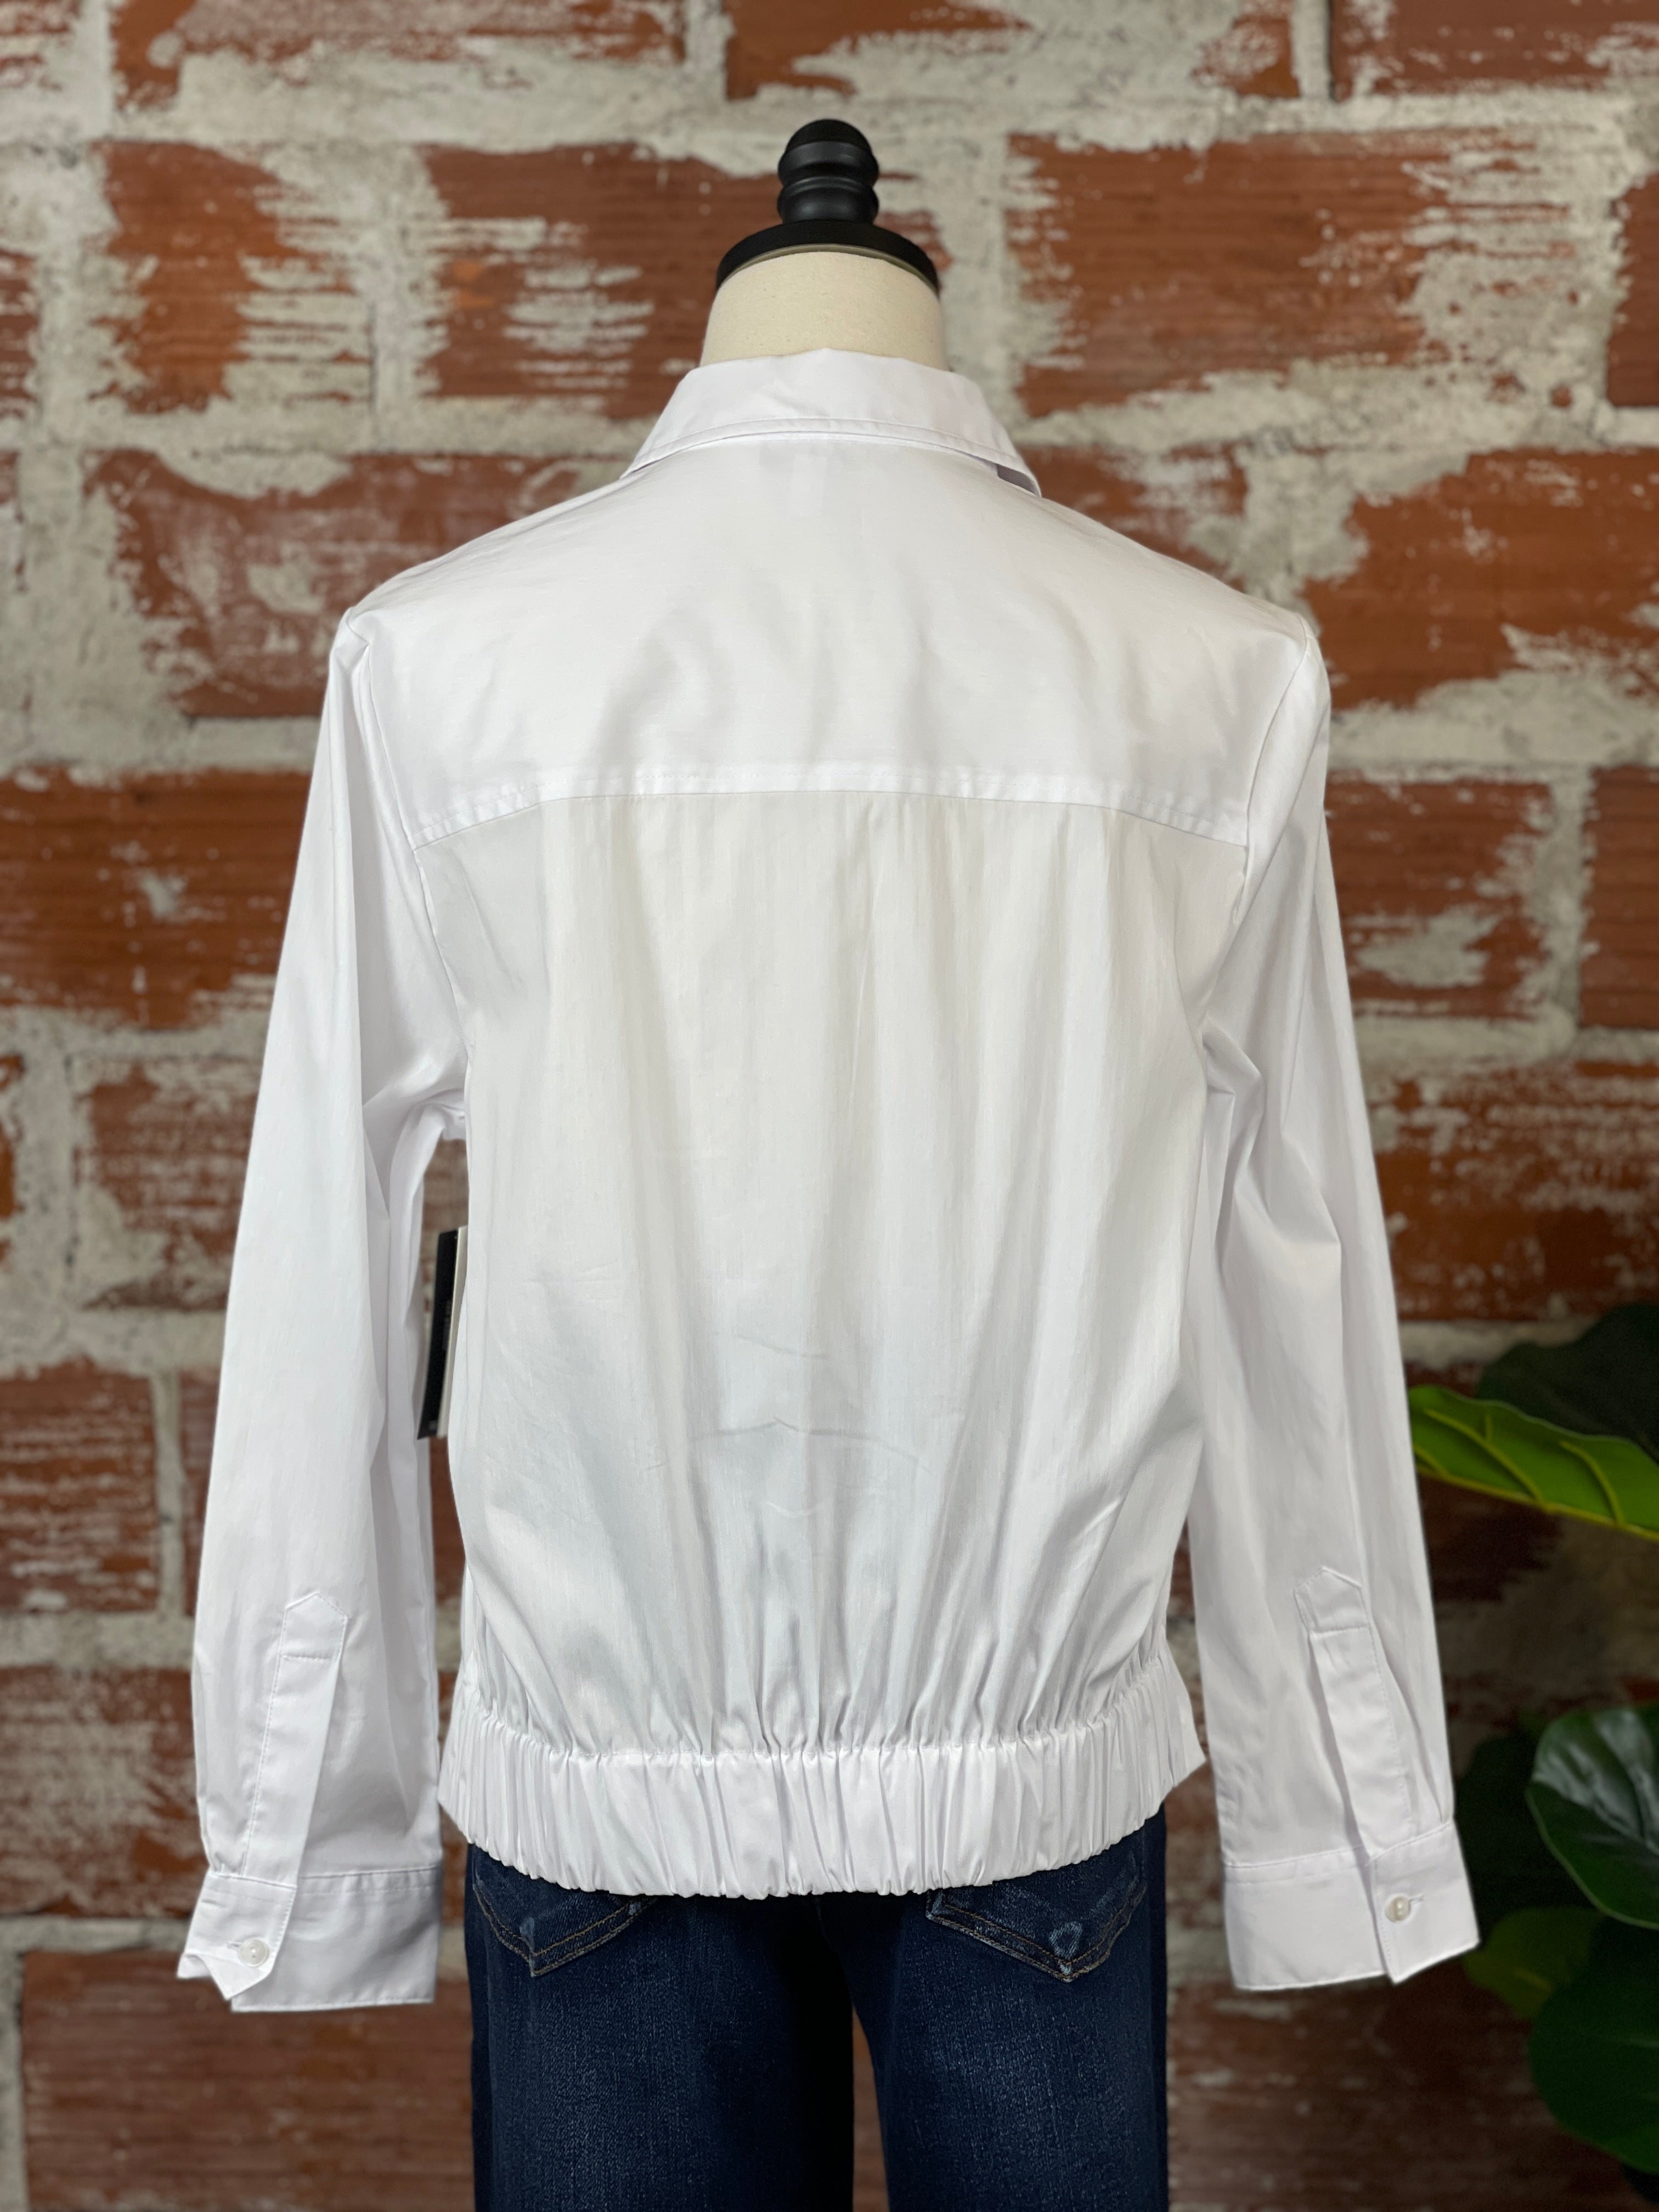 Liverpool Elastic Back Shirt in White-112 Woven Tops - Long Sleeve-Little Bird Boutique